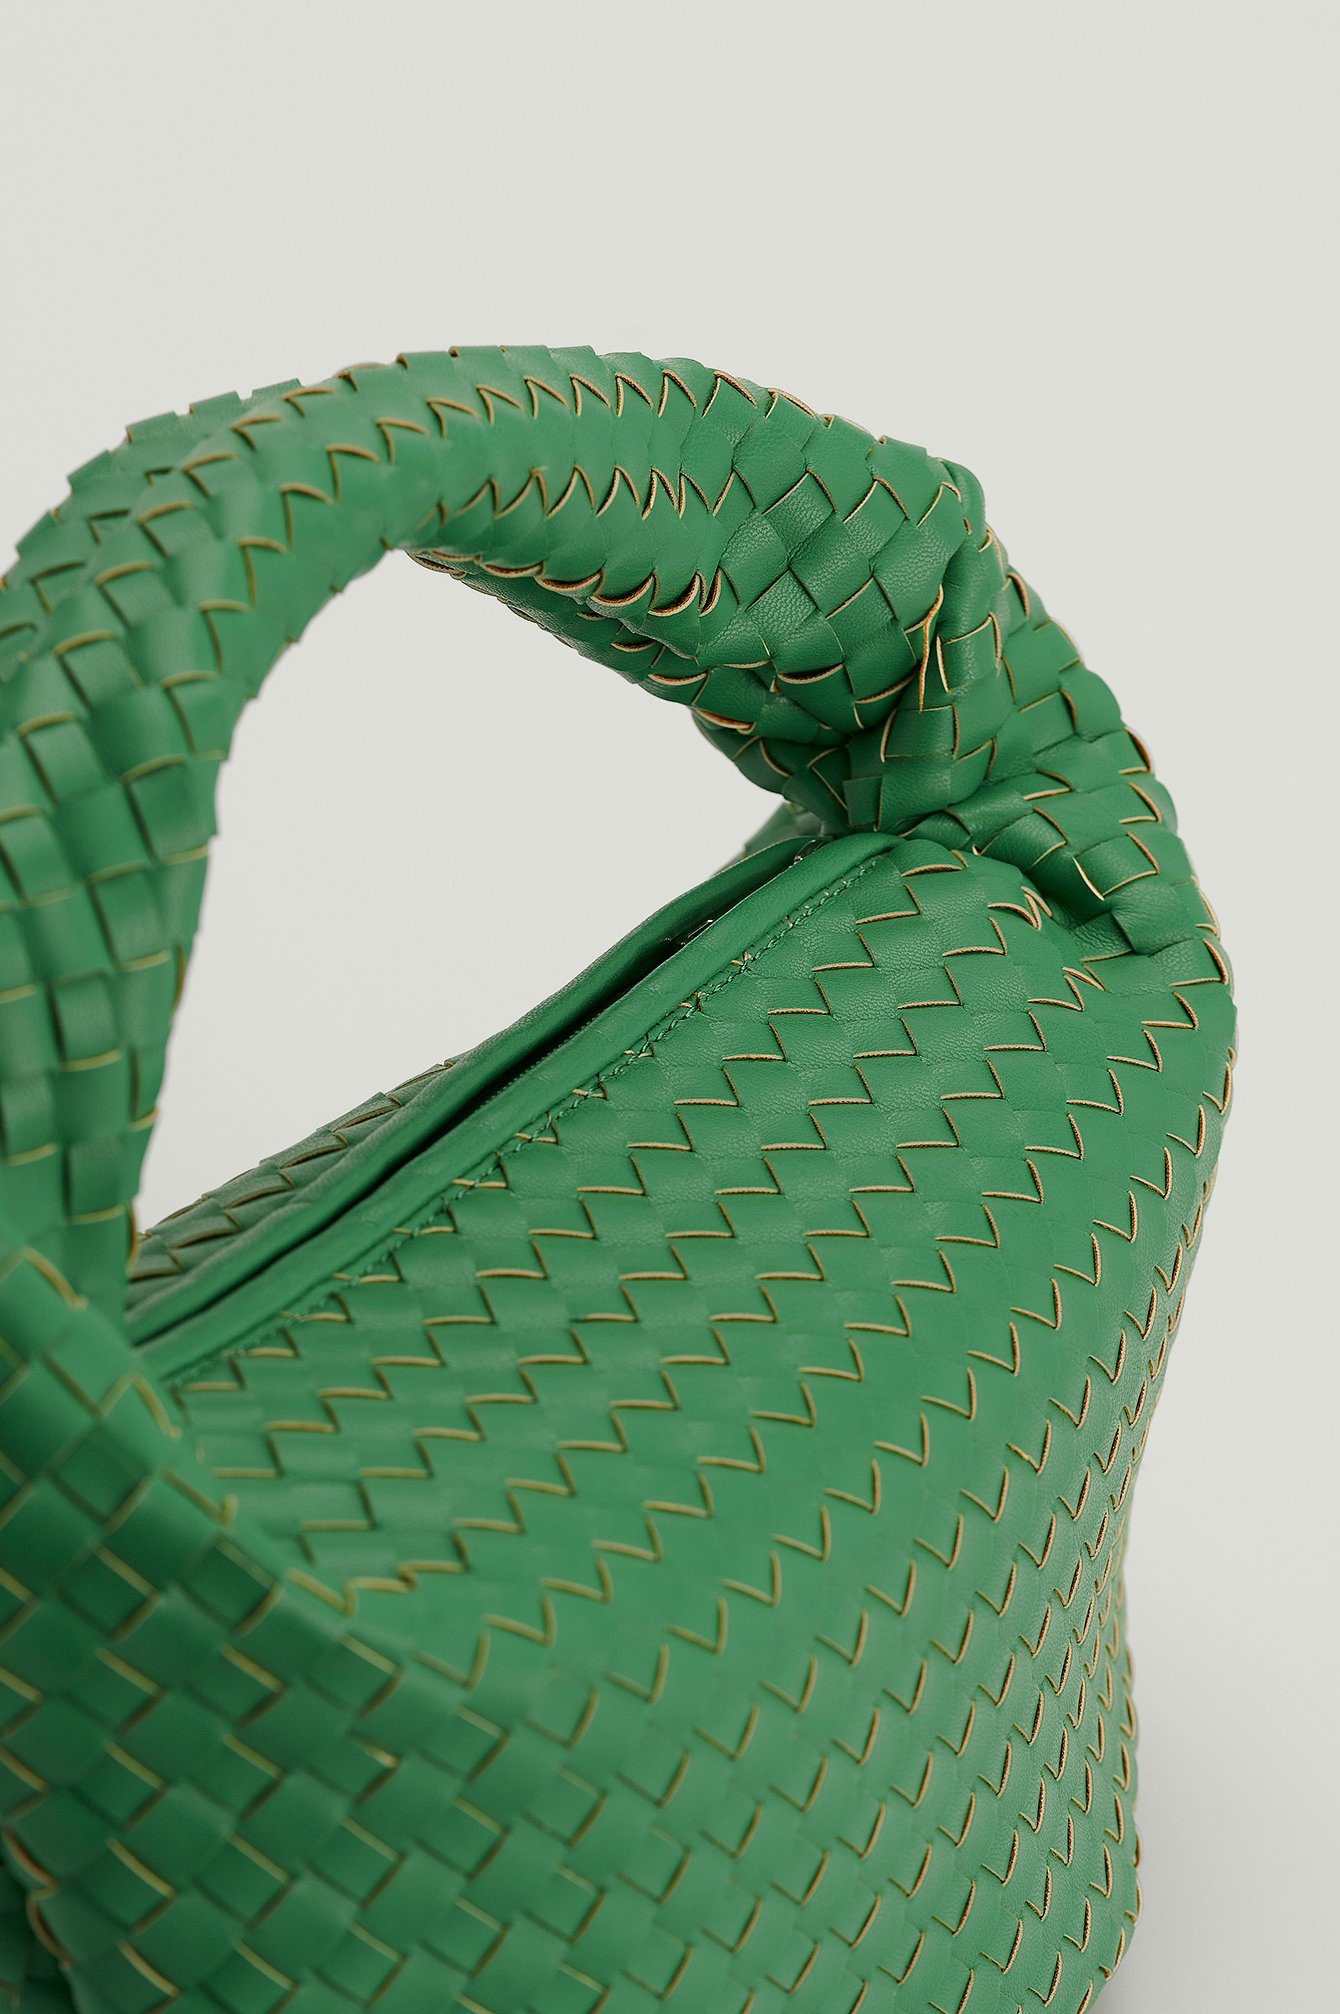 Strong Green Woven Rounded Bag